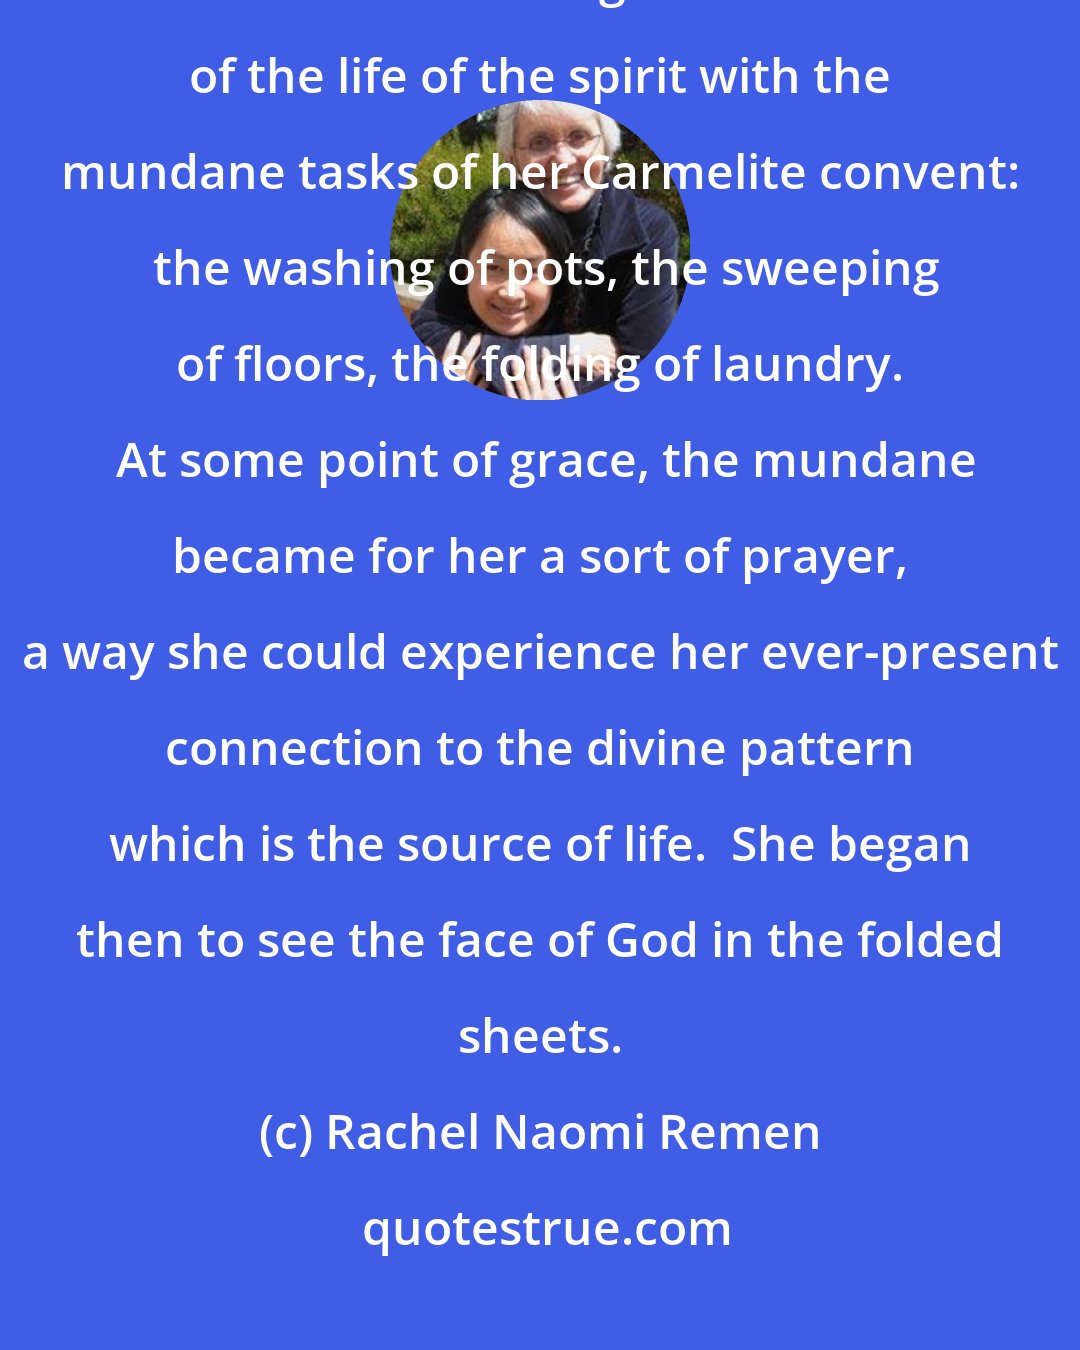 Rachel Naomi Remen: It is said that the Christian mystic Theresa of Avila found difficulty at first in reconciling the vastness of the life of the spirit with the mundane tasks of her Carmelite convent:  the washing of pots, the sweeping of floors, the folding of laundry.  At some point of grace, the mundane became for her a sort of prayer, a way she could experience her ever-present connection to the divine pattern which is the source of life.  She began then to see the face of God in the folded sheets.